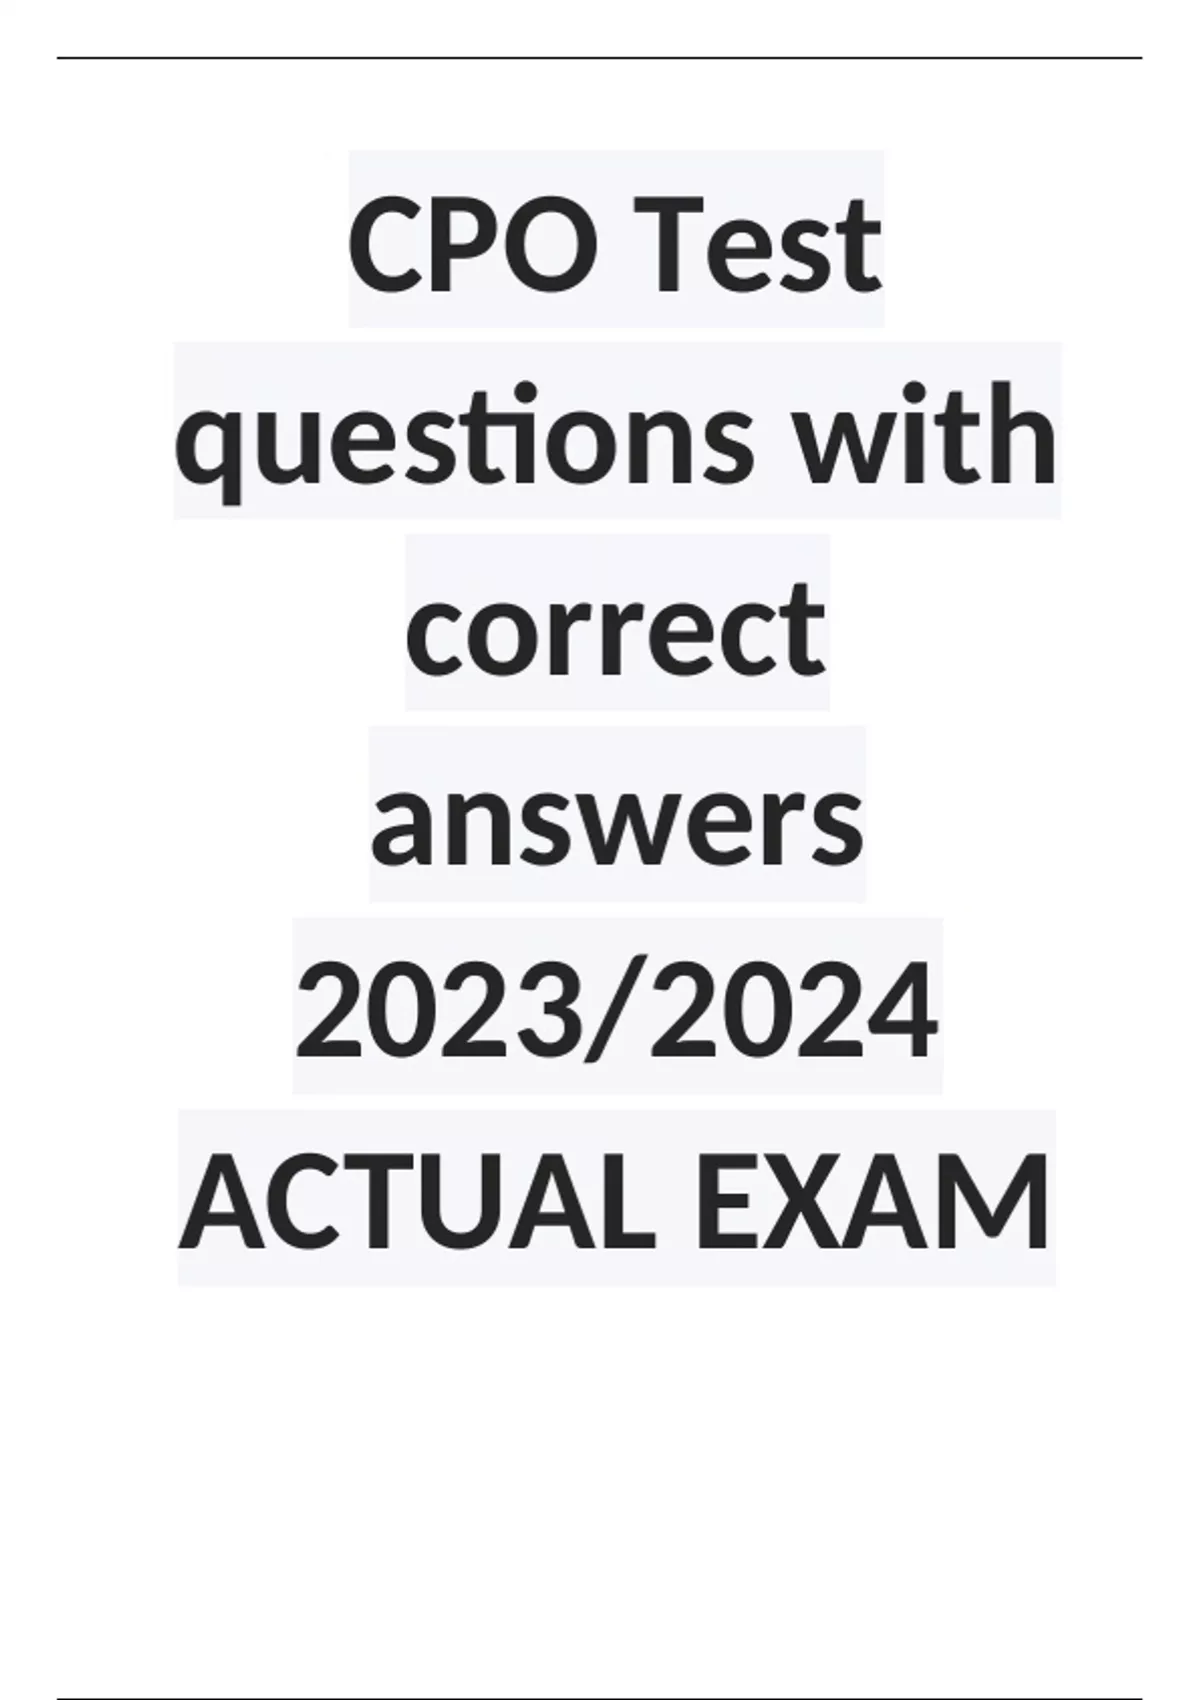 CPO Test questions with correct answers 2023/2024 ACTUAL EXAM CPO